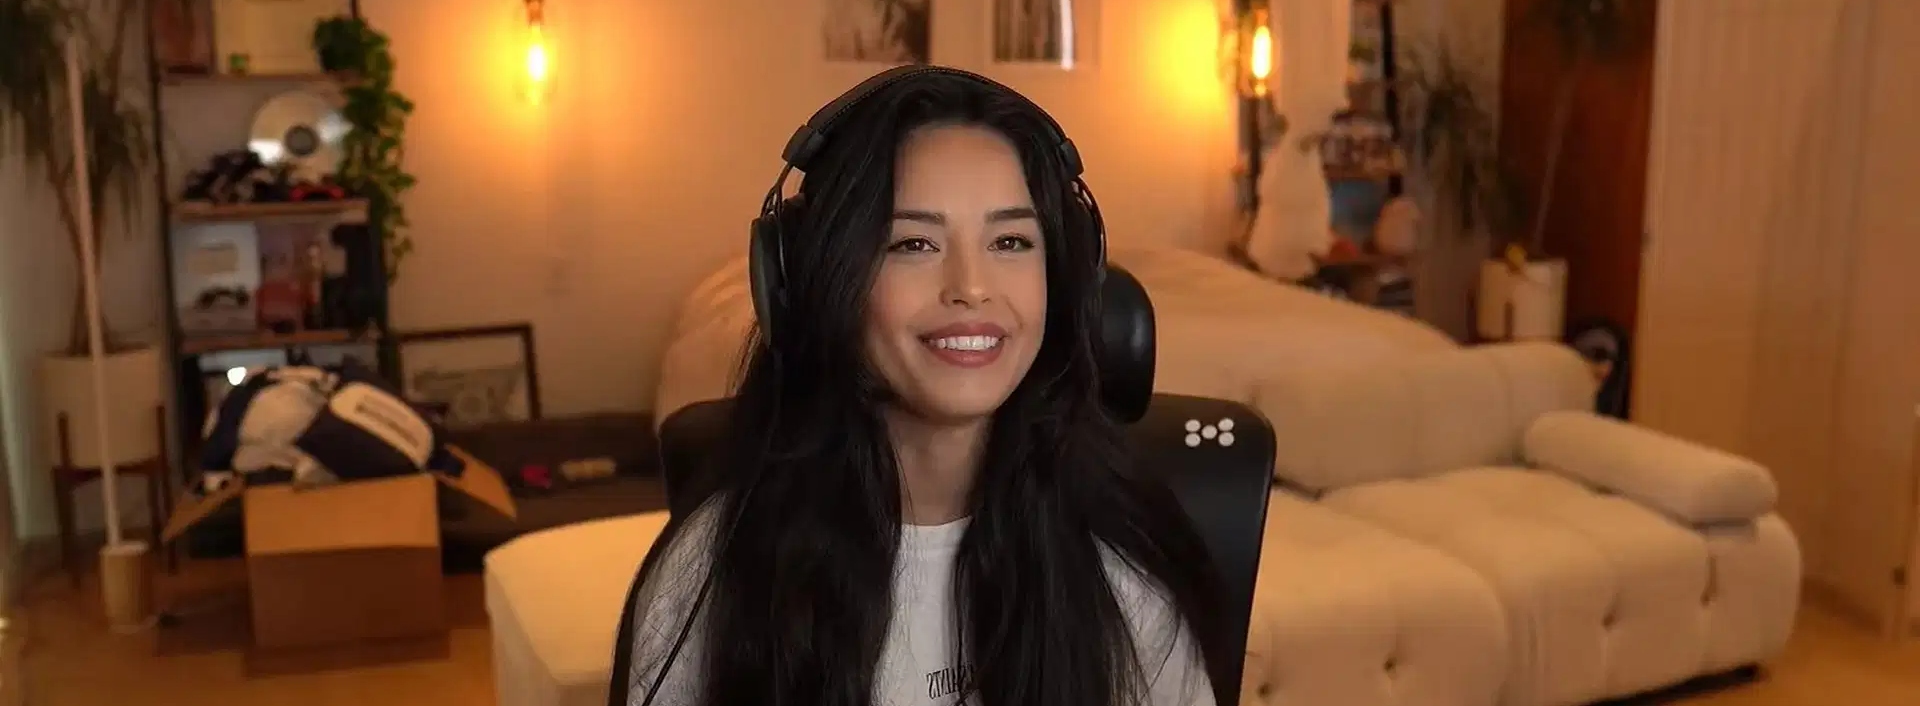 Who is Valkyrae? Meet YouTube's Most-Watched Female Streamer 